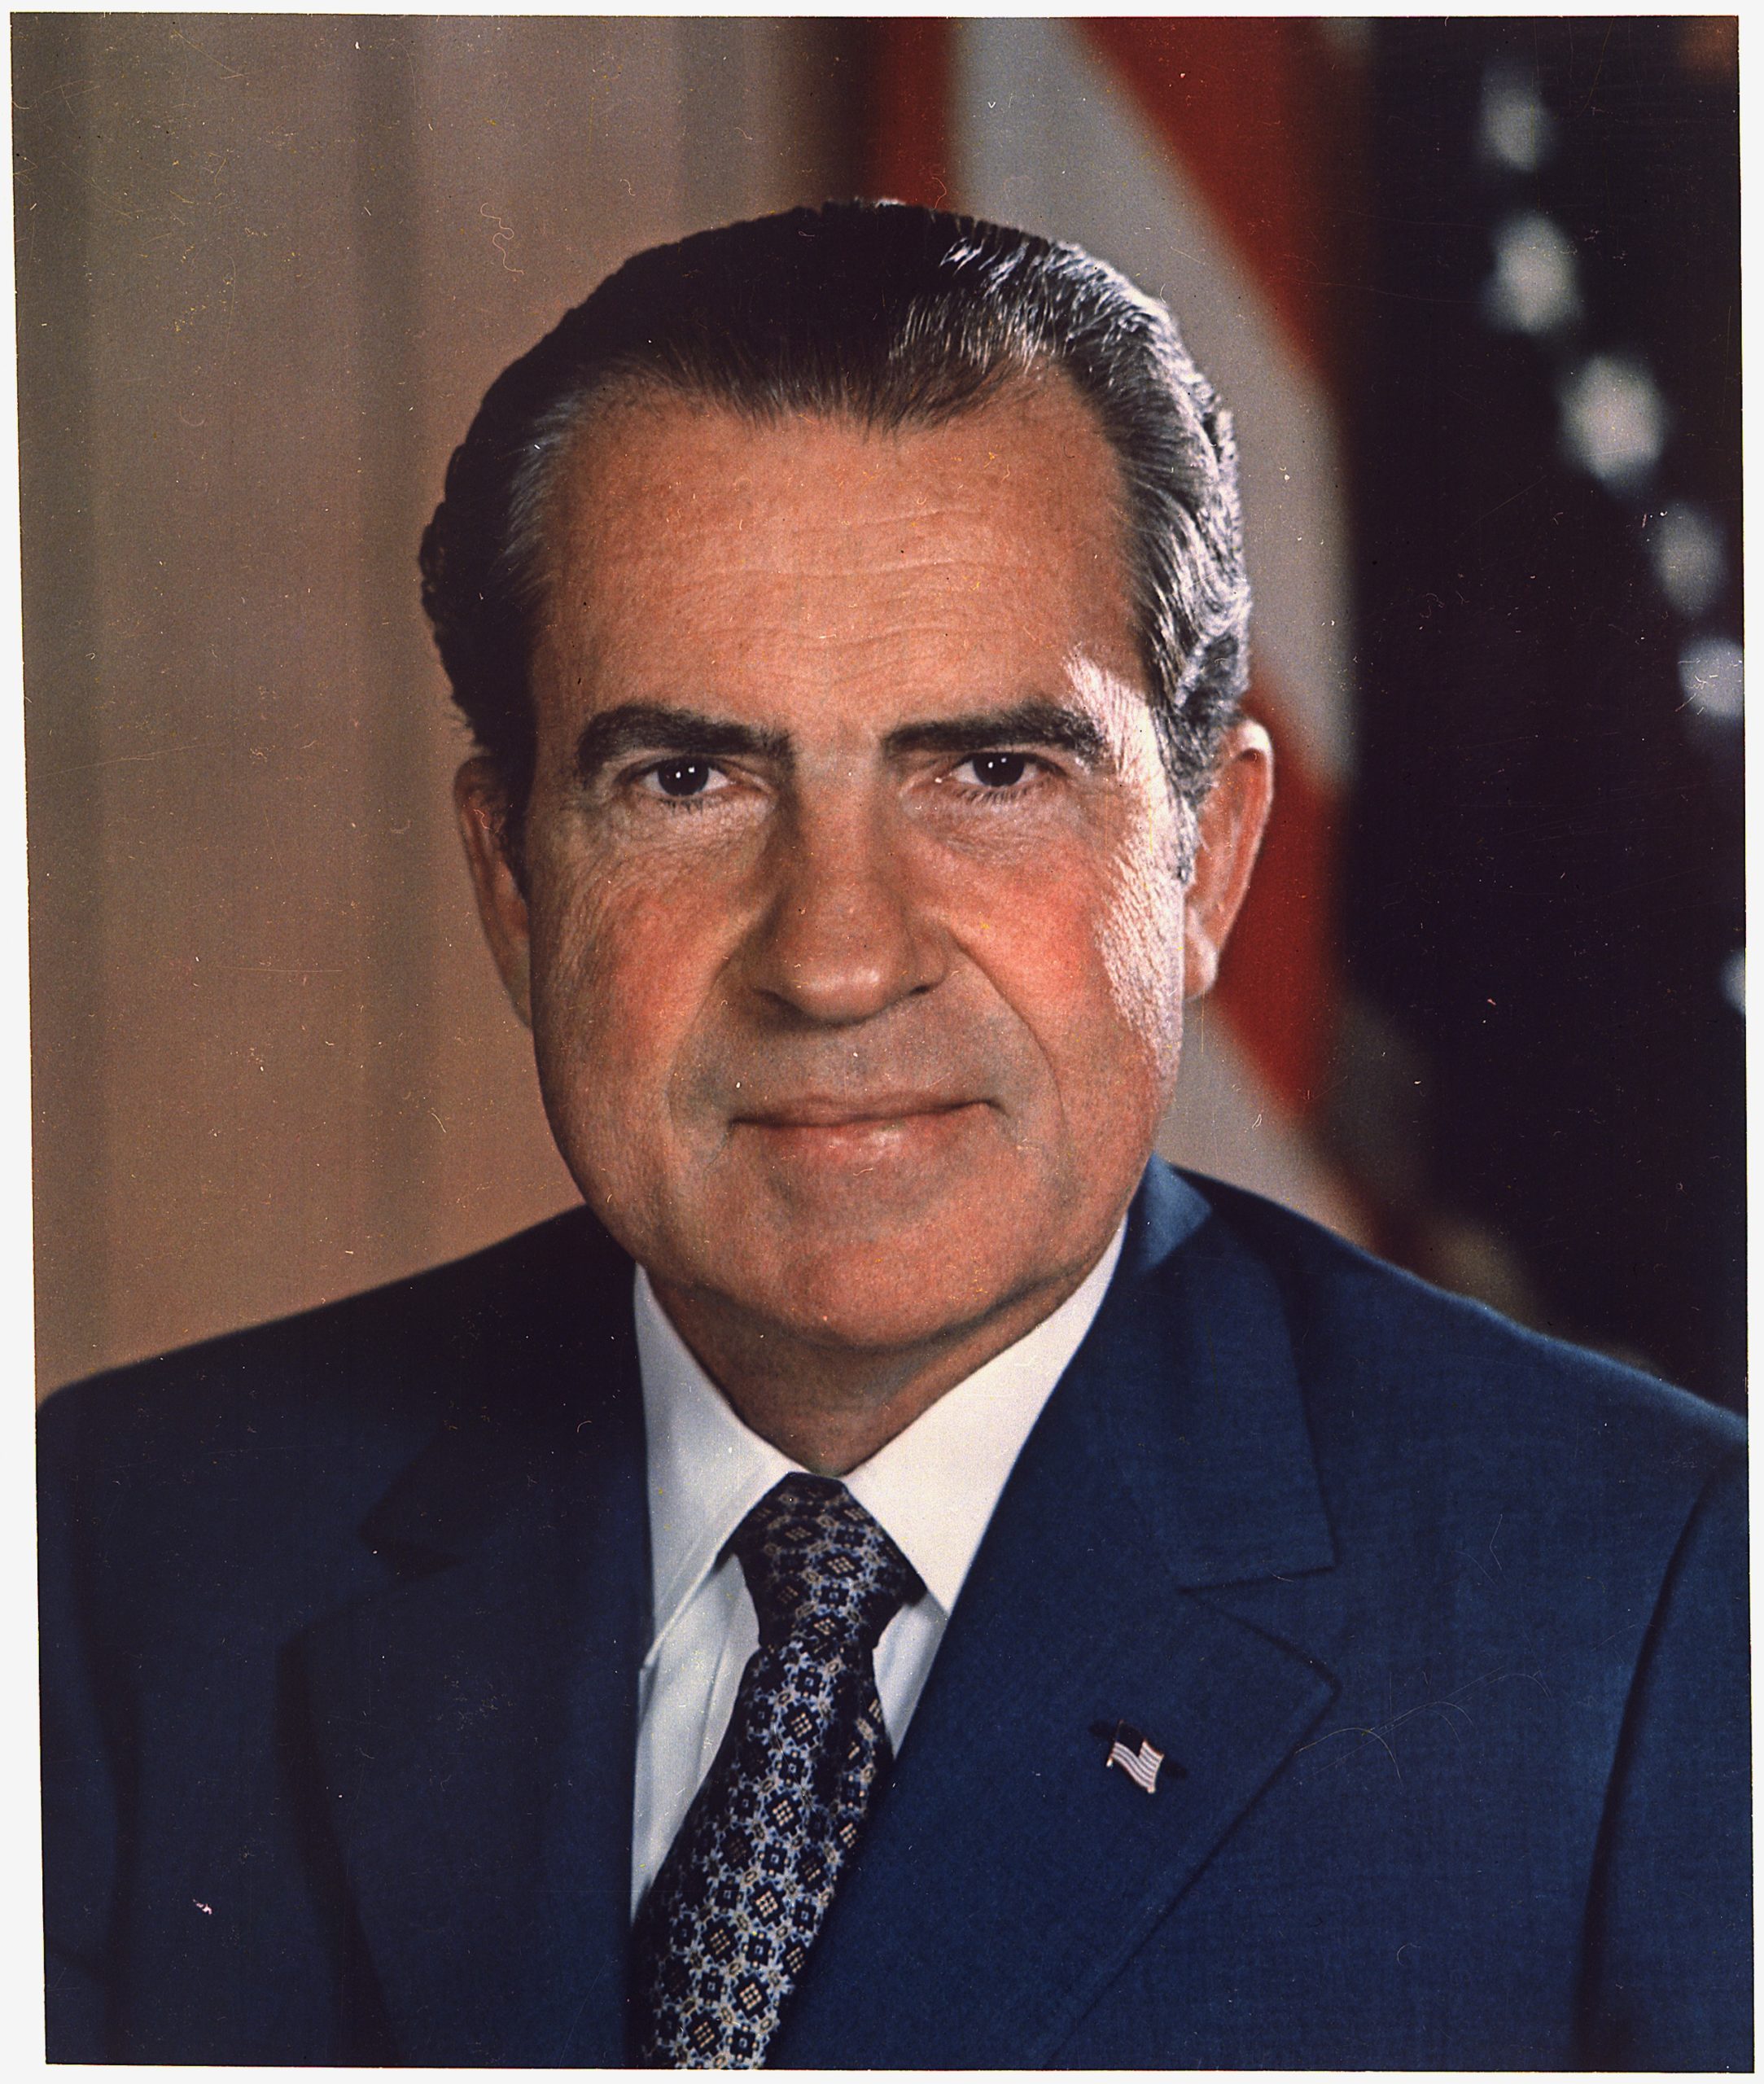 Nixon's record on the environment was one of the strongest in history | Bipartisan Environmental Activism 